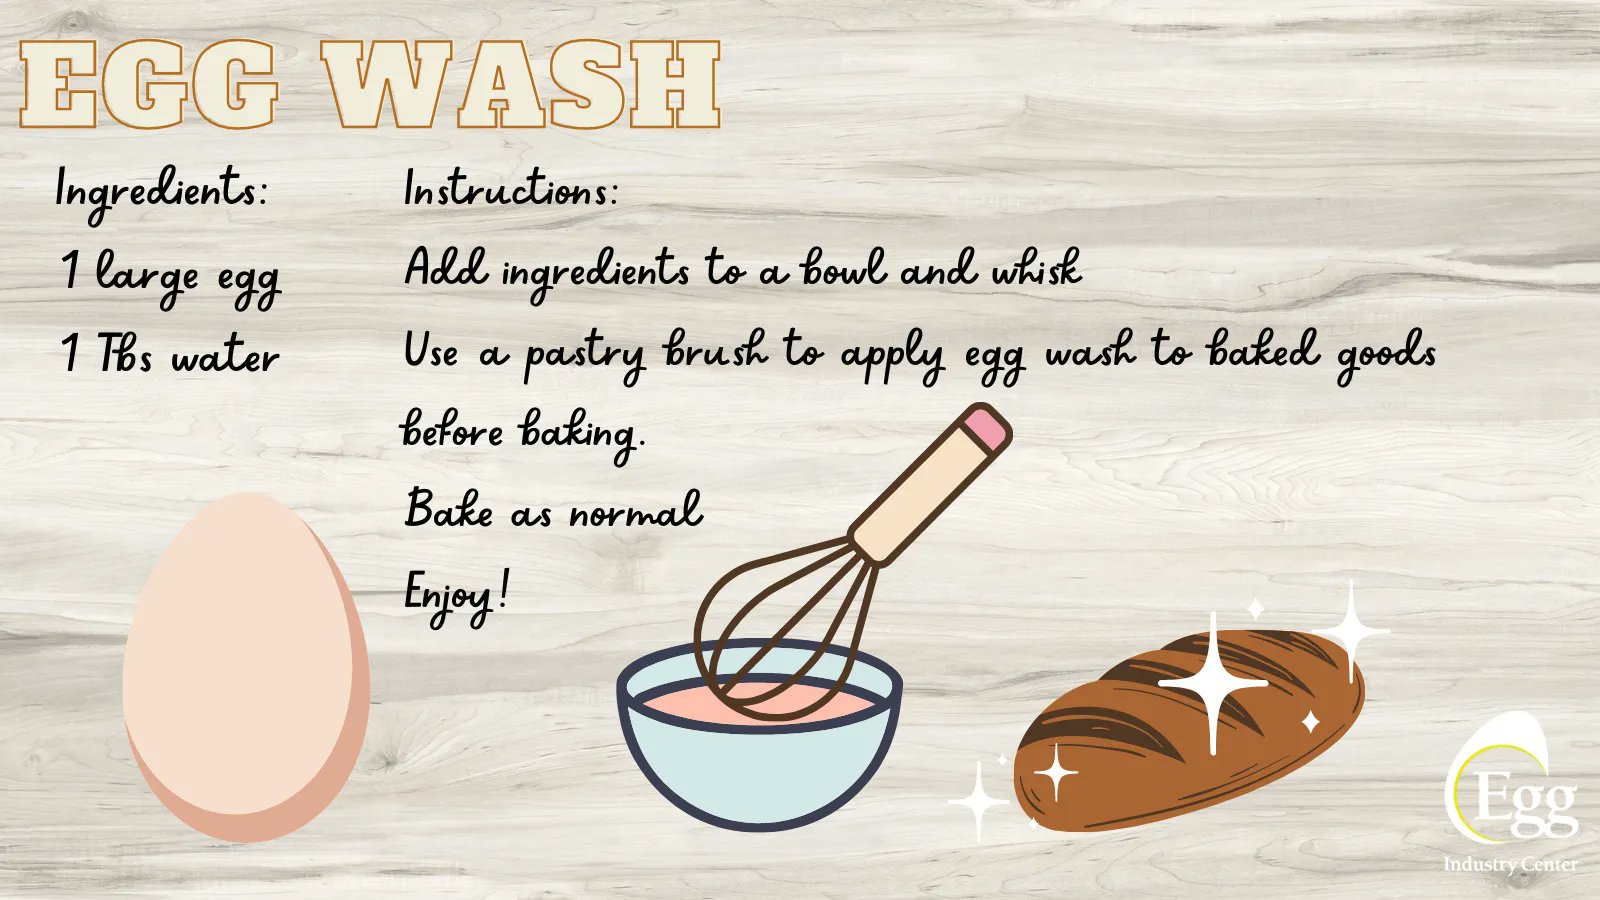 How to Make and Use an Egg Wash